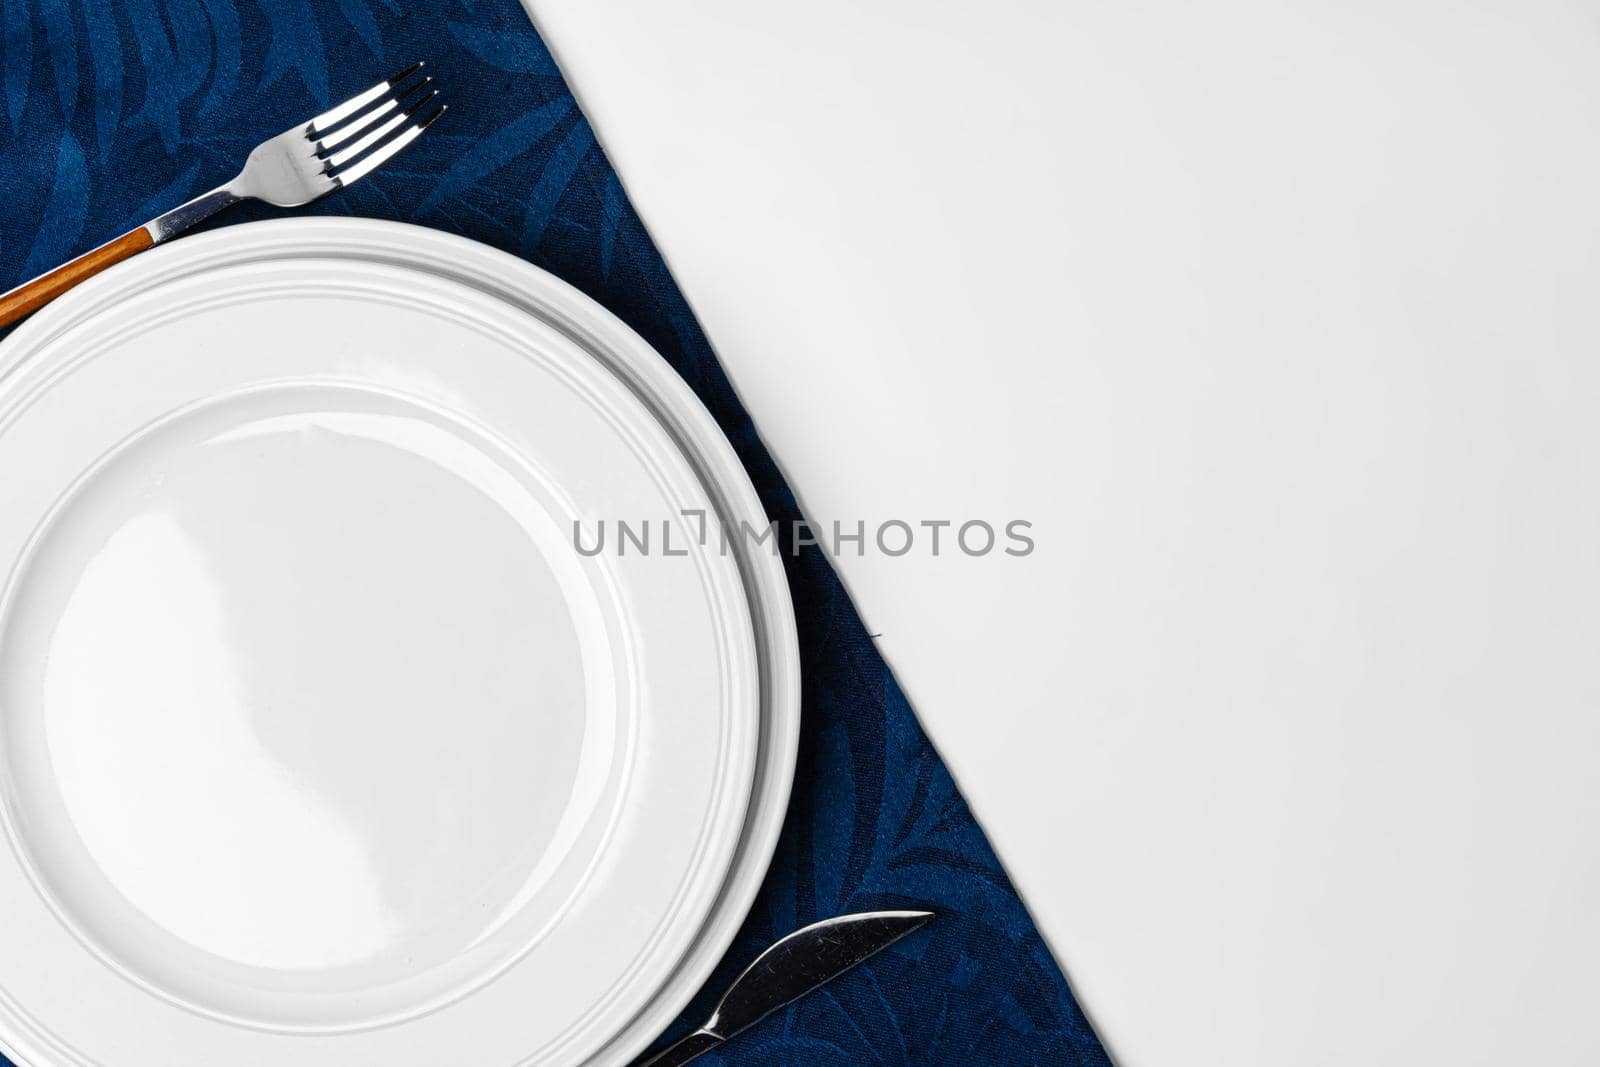 Fork, knife and plate on towel. Isolated on white background. Close up.